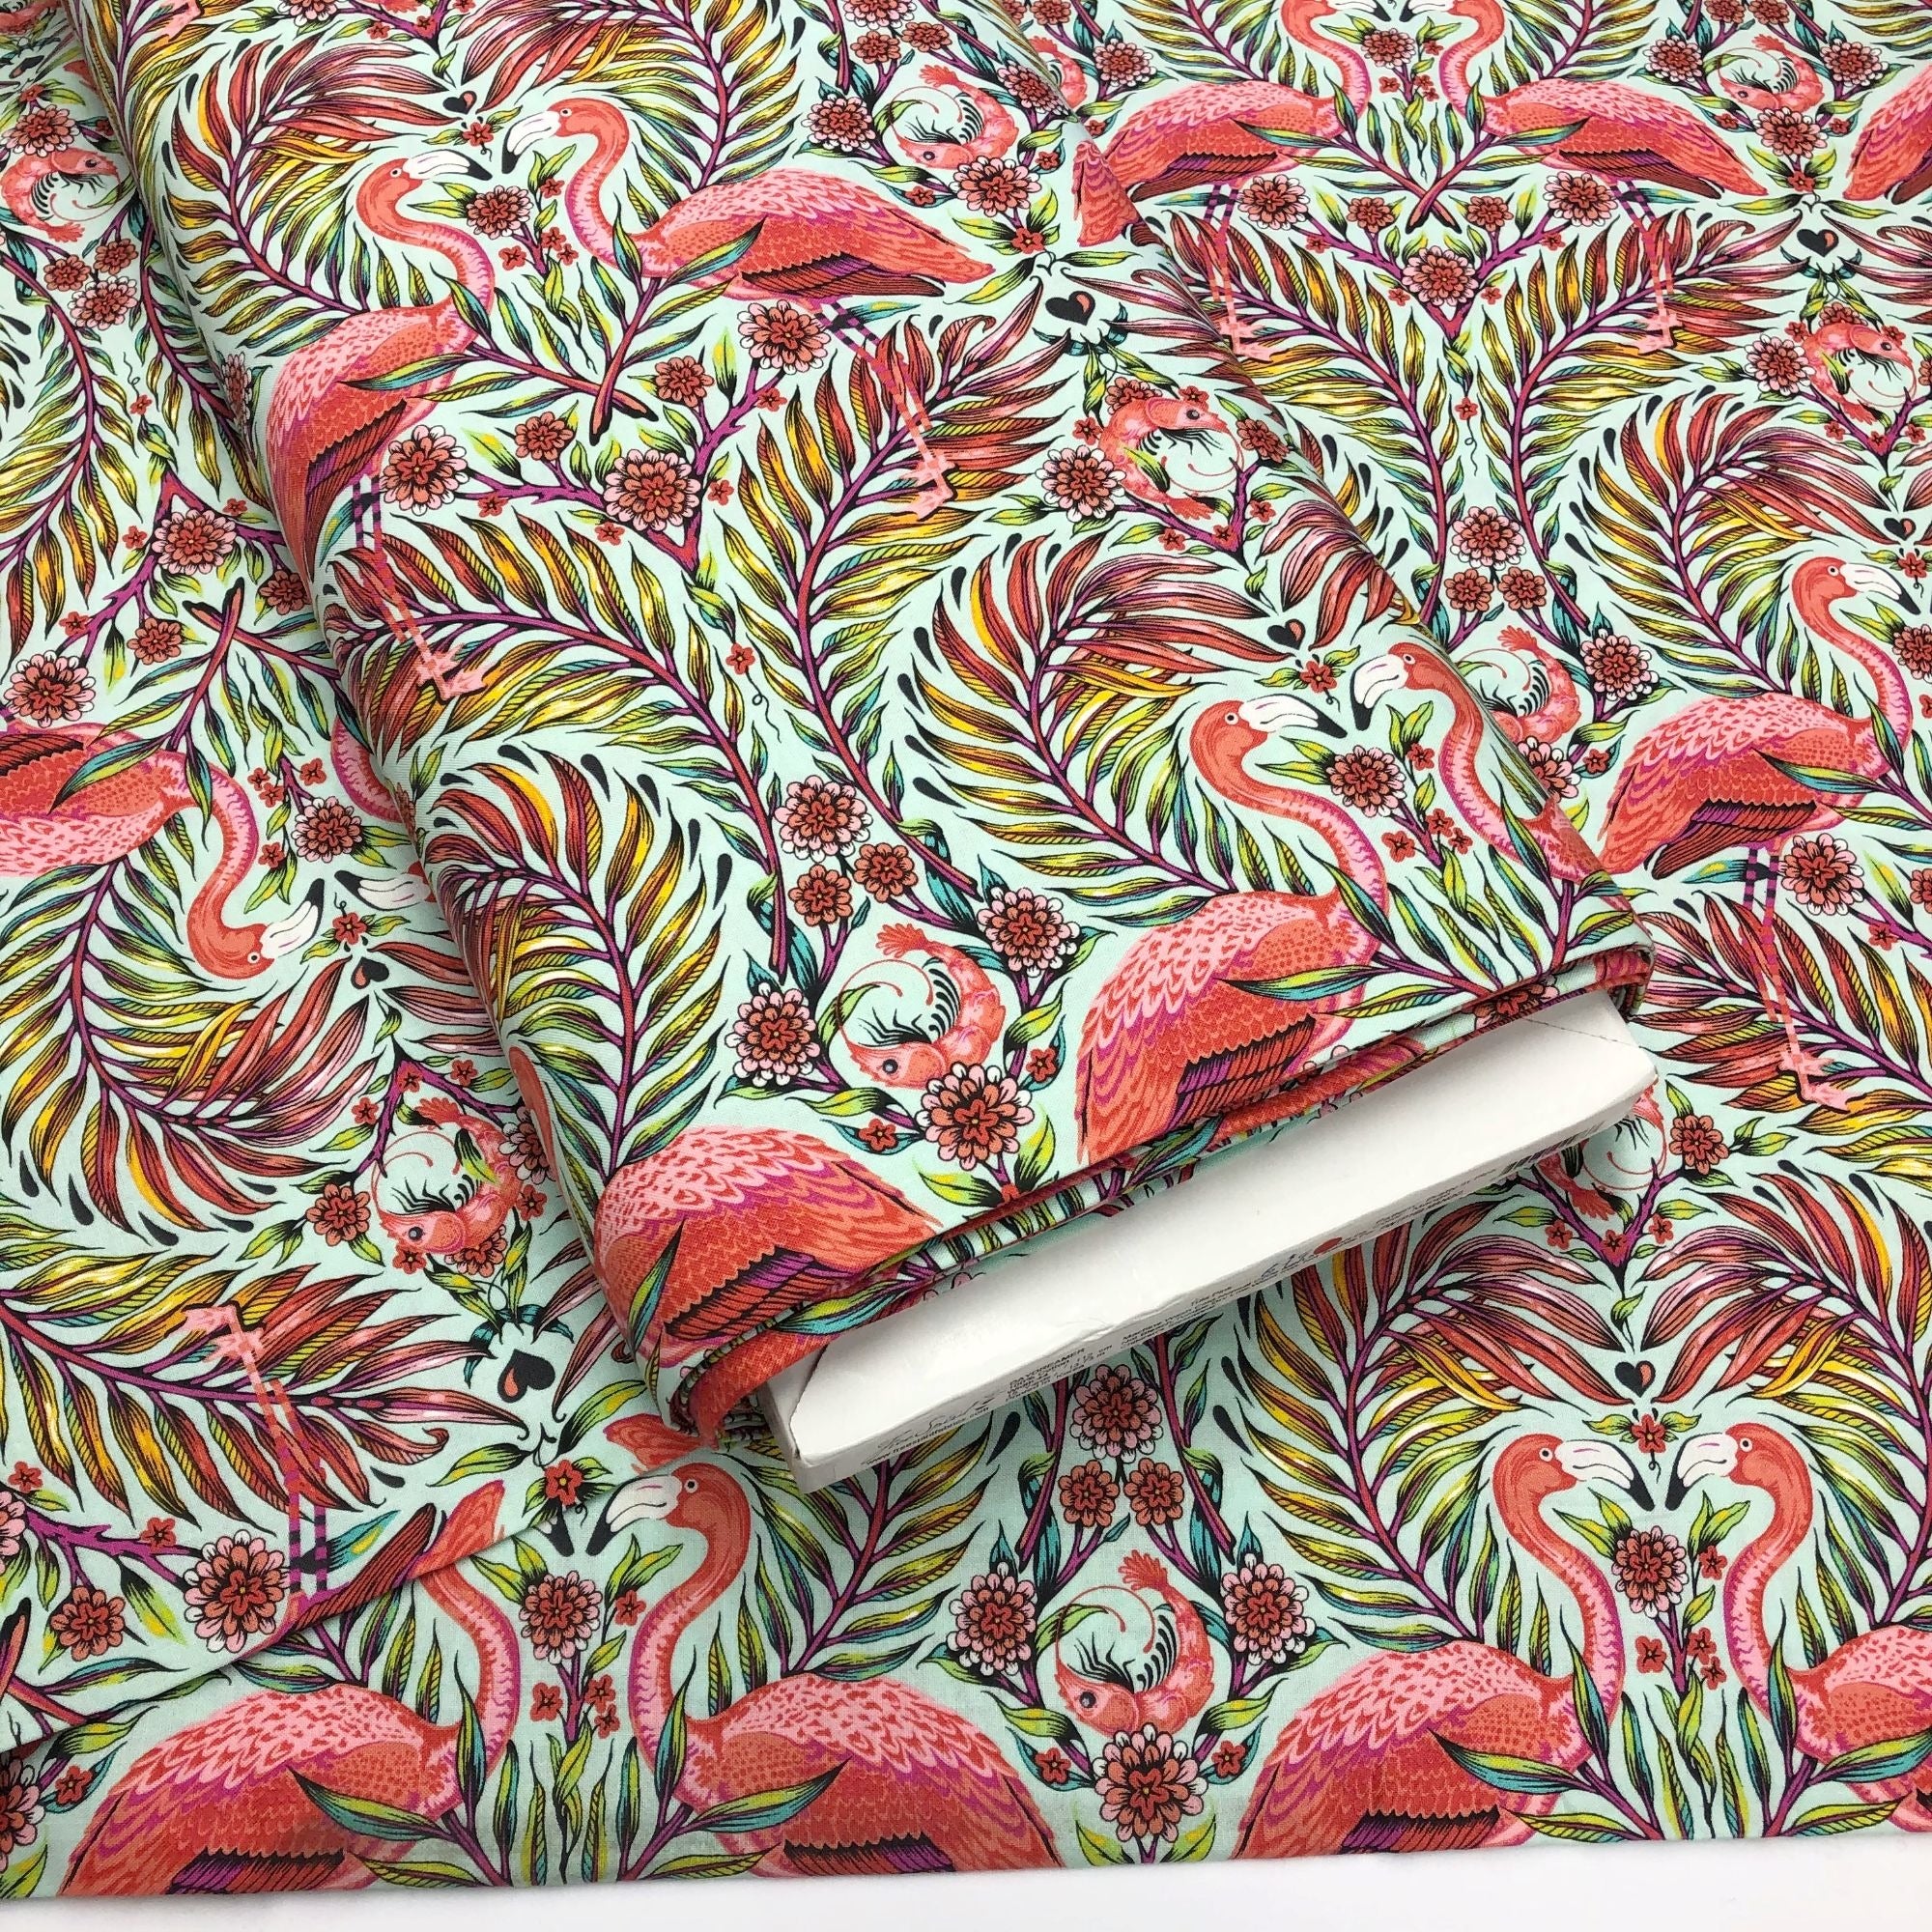 Tula Pink for Free Spirit Daydreamer Pretty In Pink Flamingos Cotton Fabric in Mango